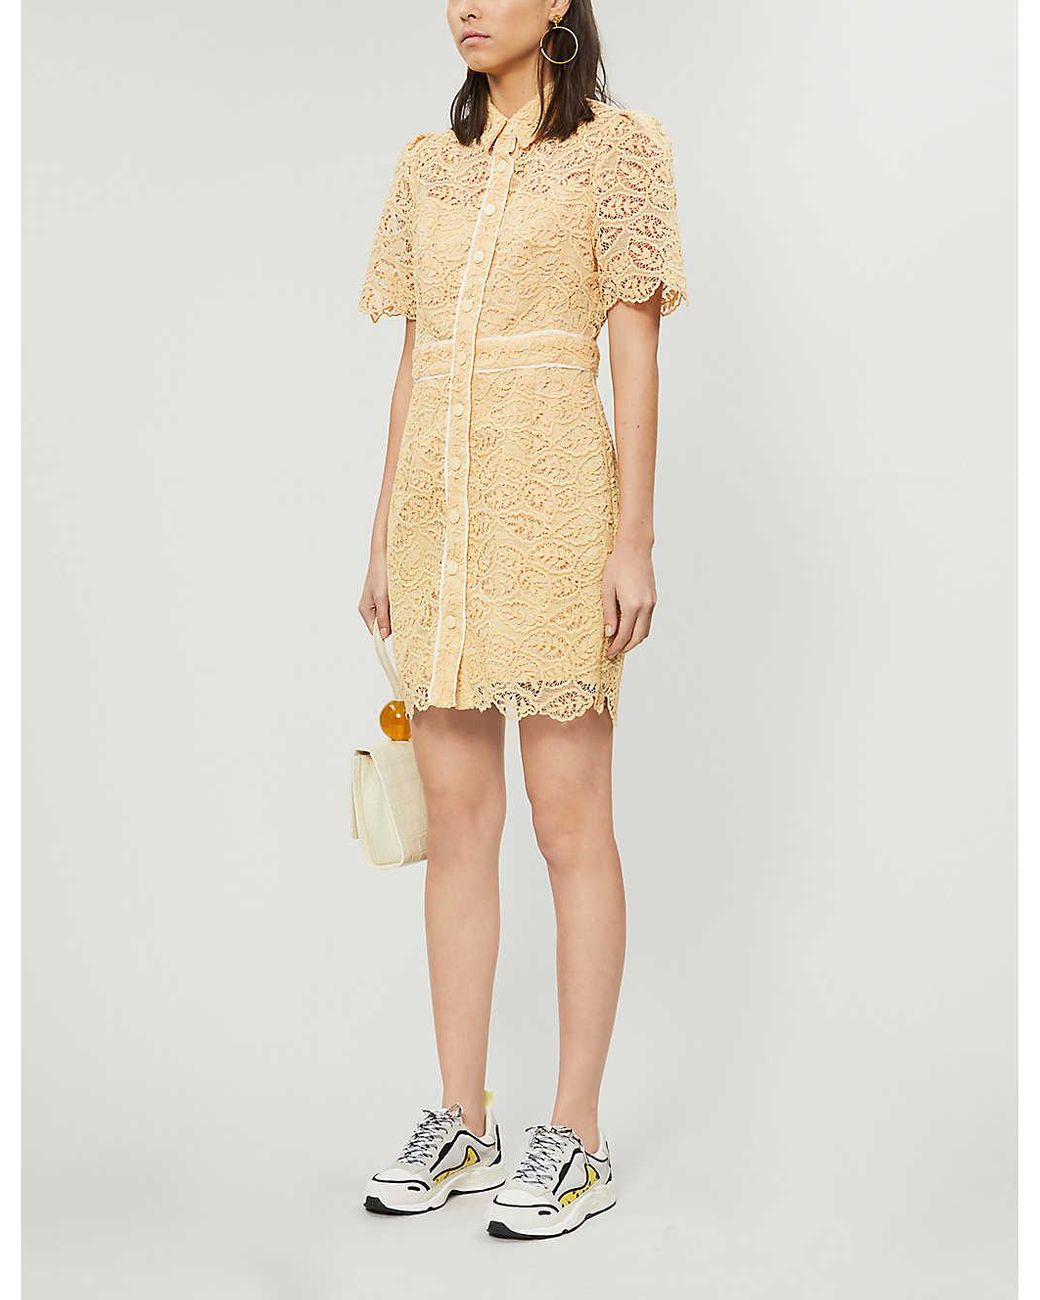 Sandro Live Embroidered-floral Lace Mini Dress in Yellow | Lyst Canada